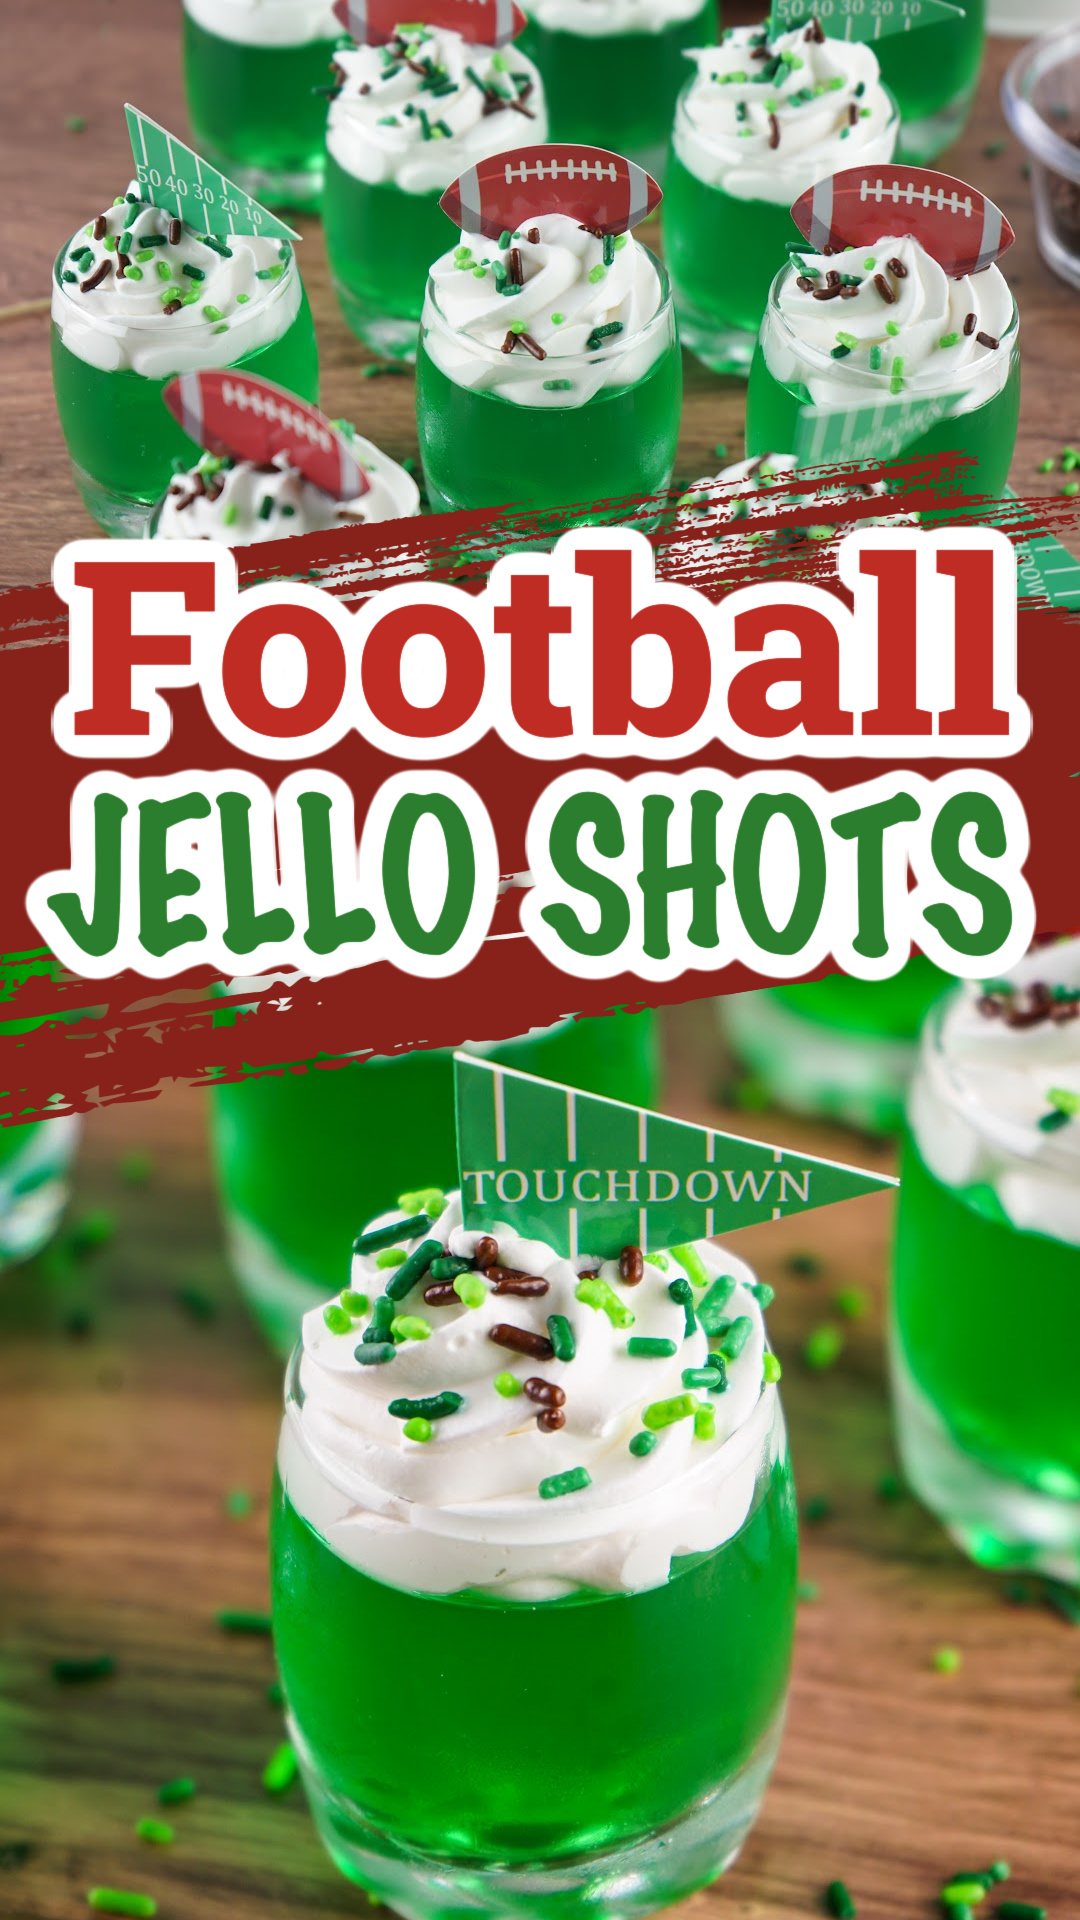 A double image pinterest photo of Green jello shots topped with whipped cream with brown and green sprinkles and football toppers. The perfect game day football jello shots!